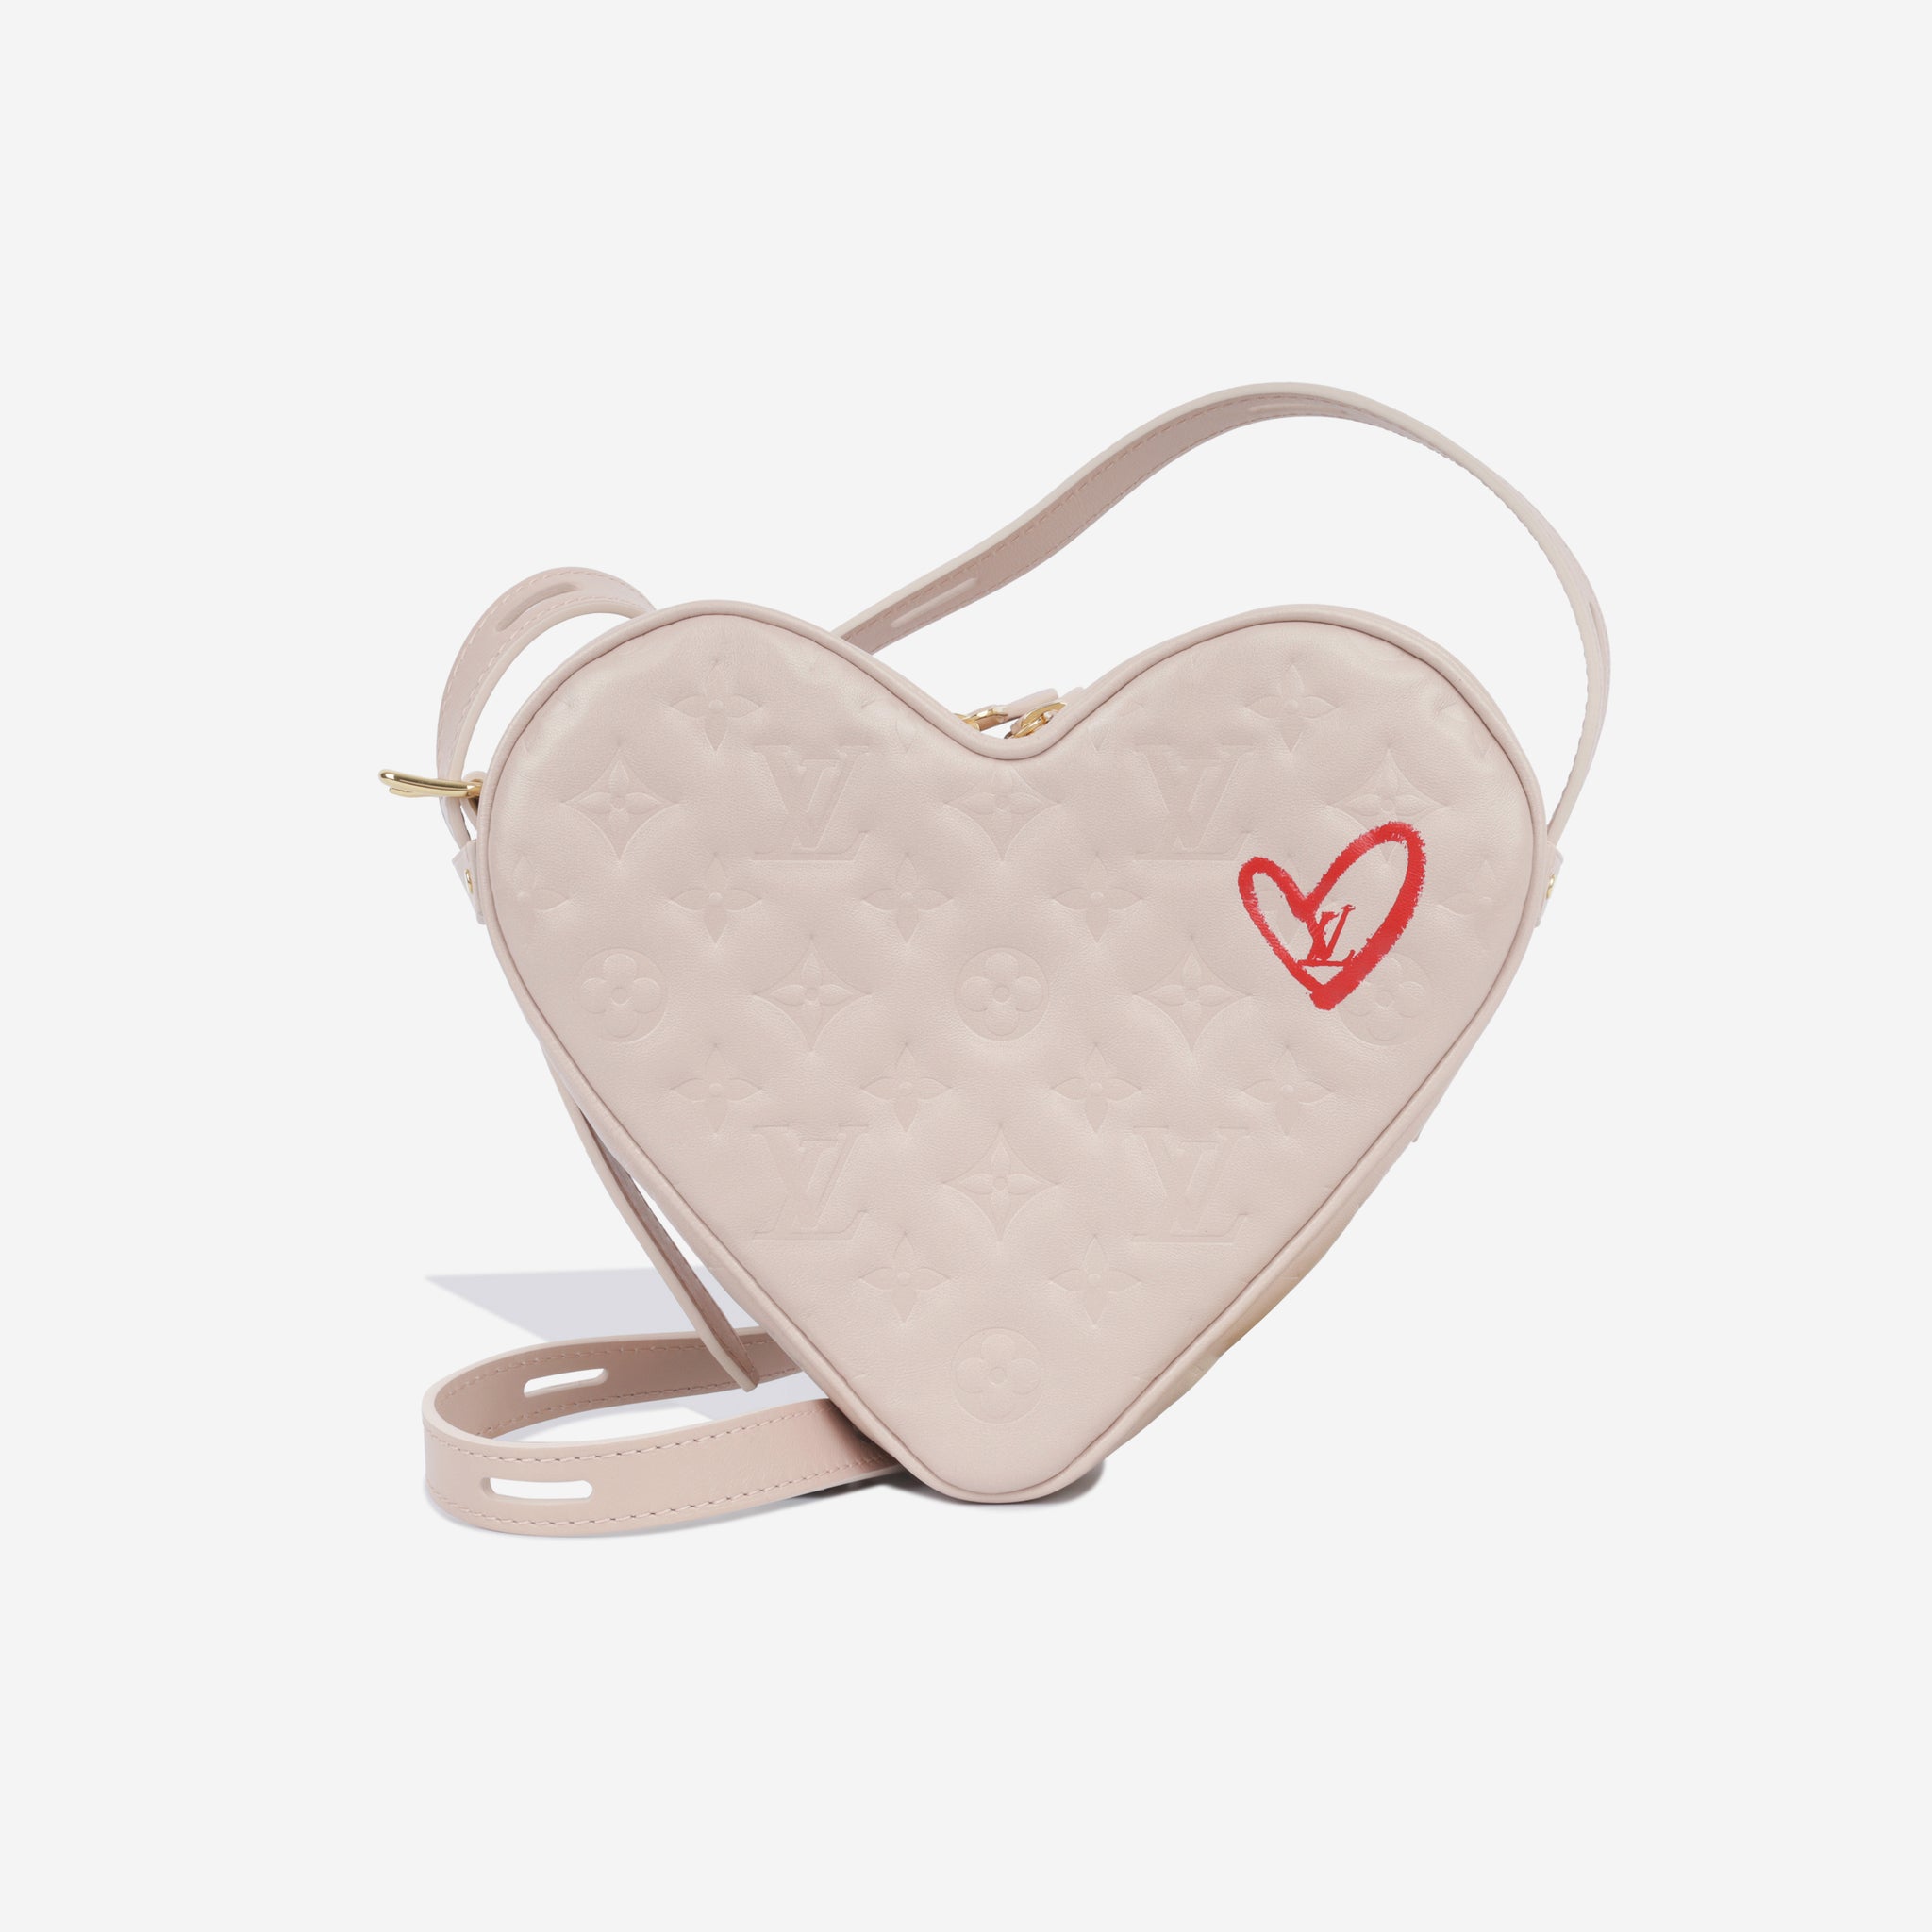 Louis Vuitton Game On Coeur Bag In A Dainty Heart Shape Form  GirlStyle  Singapore